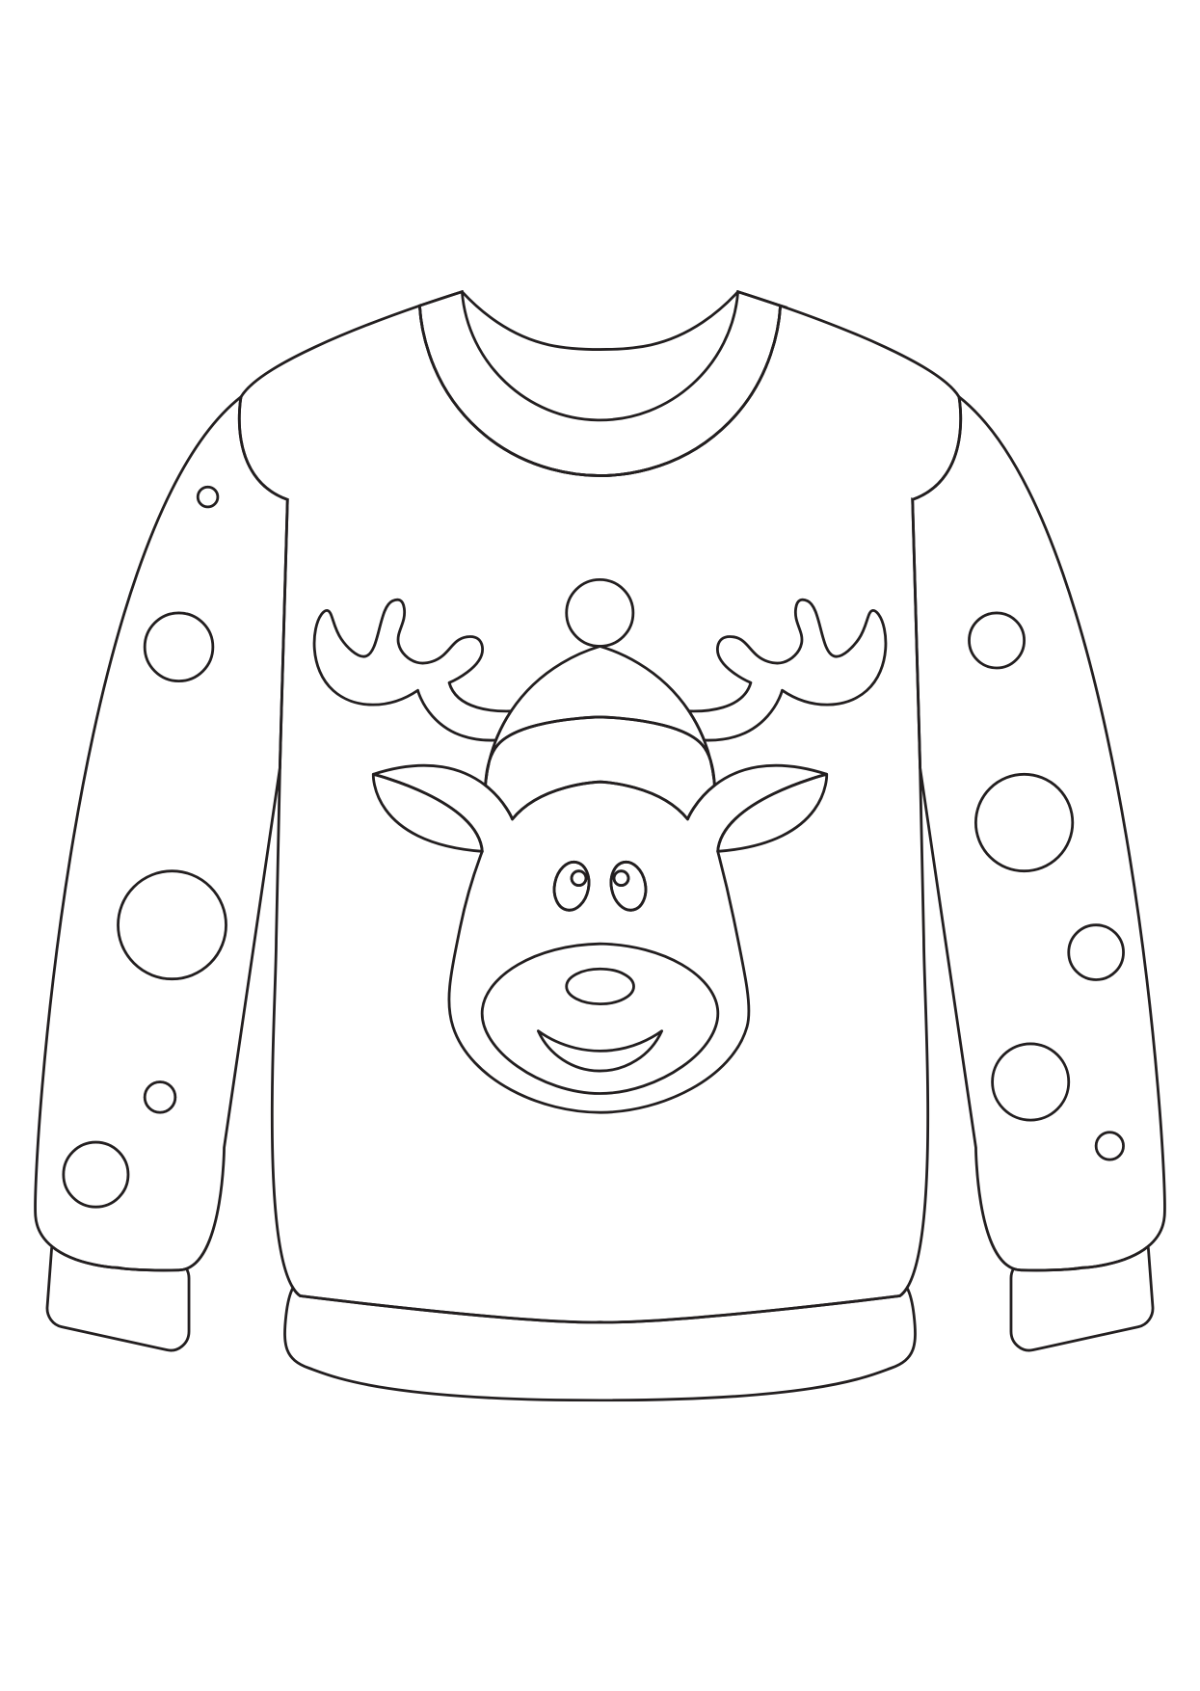 Free Ugly Christmas Sweater Coloring Page Template